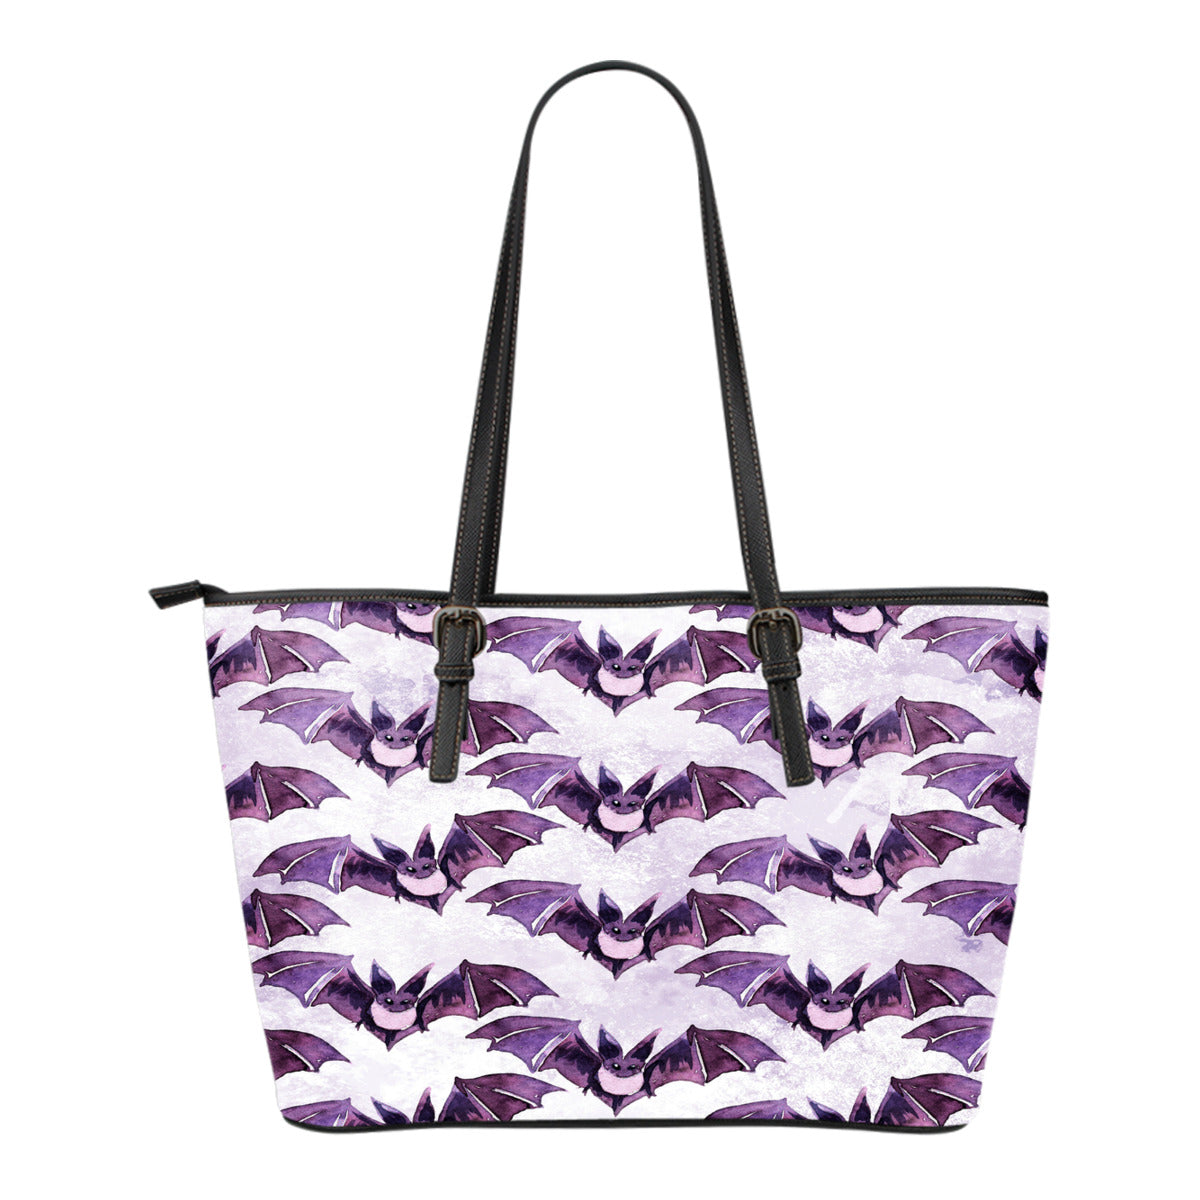 Witch Themed Design C15 Women Small Leather Tote Bag